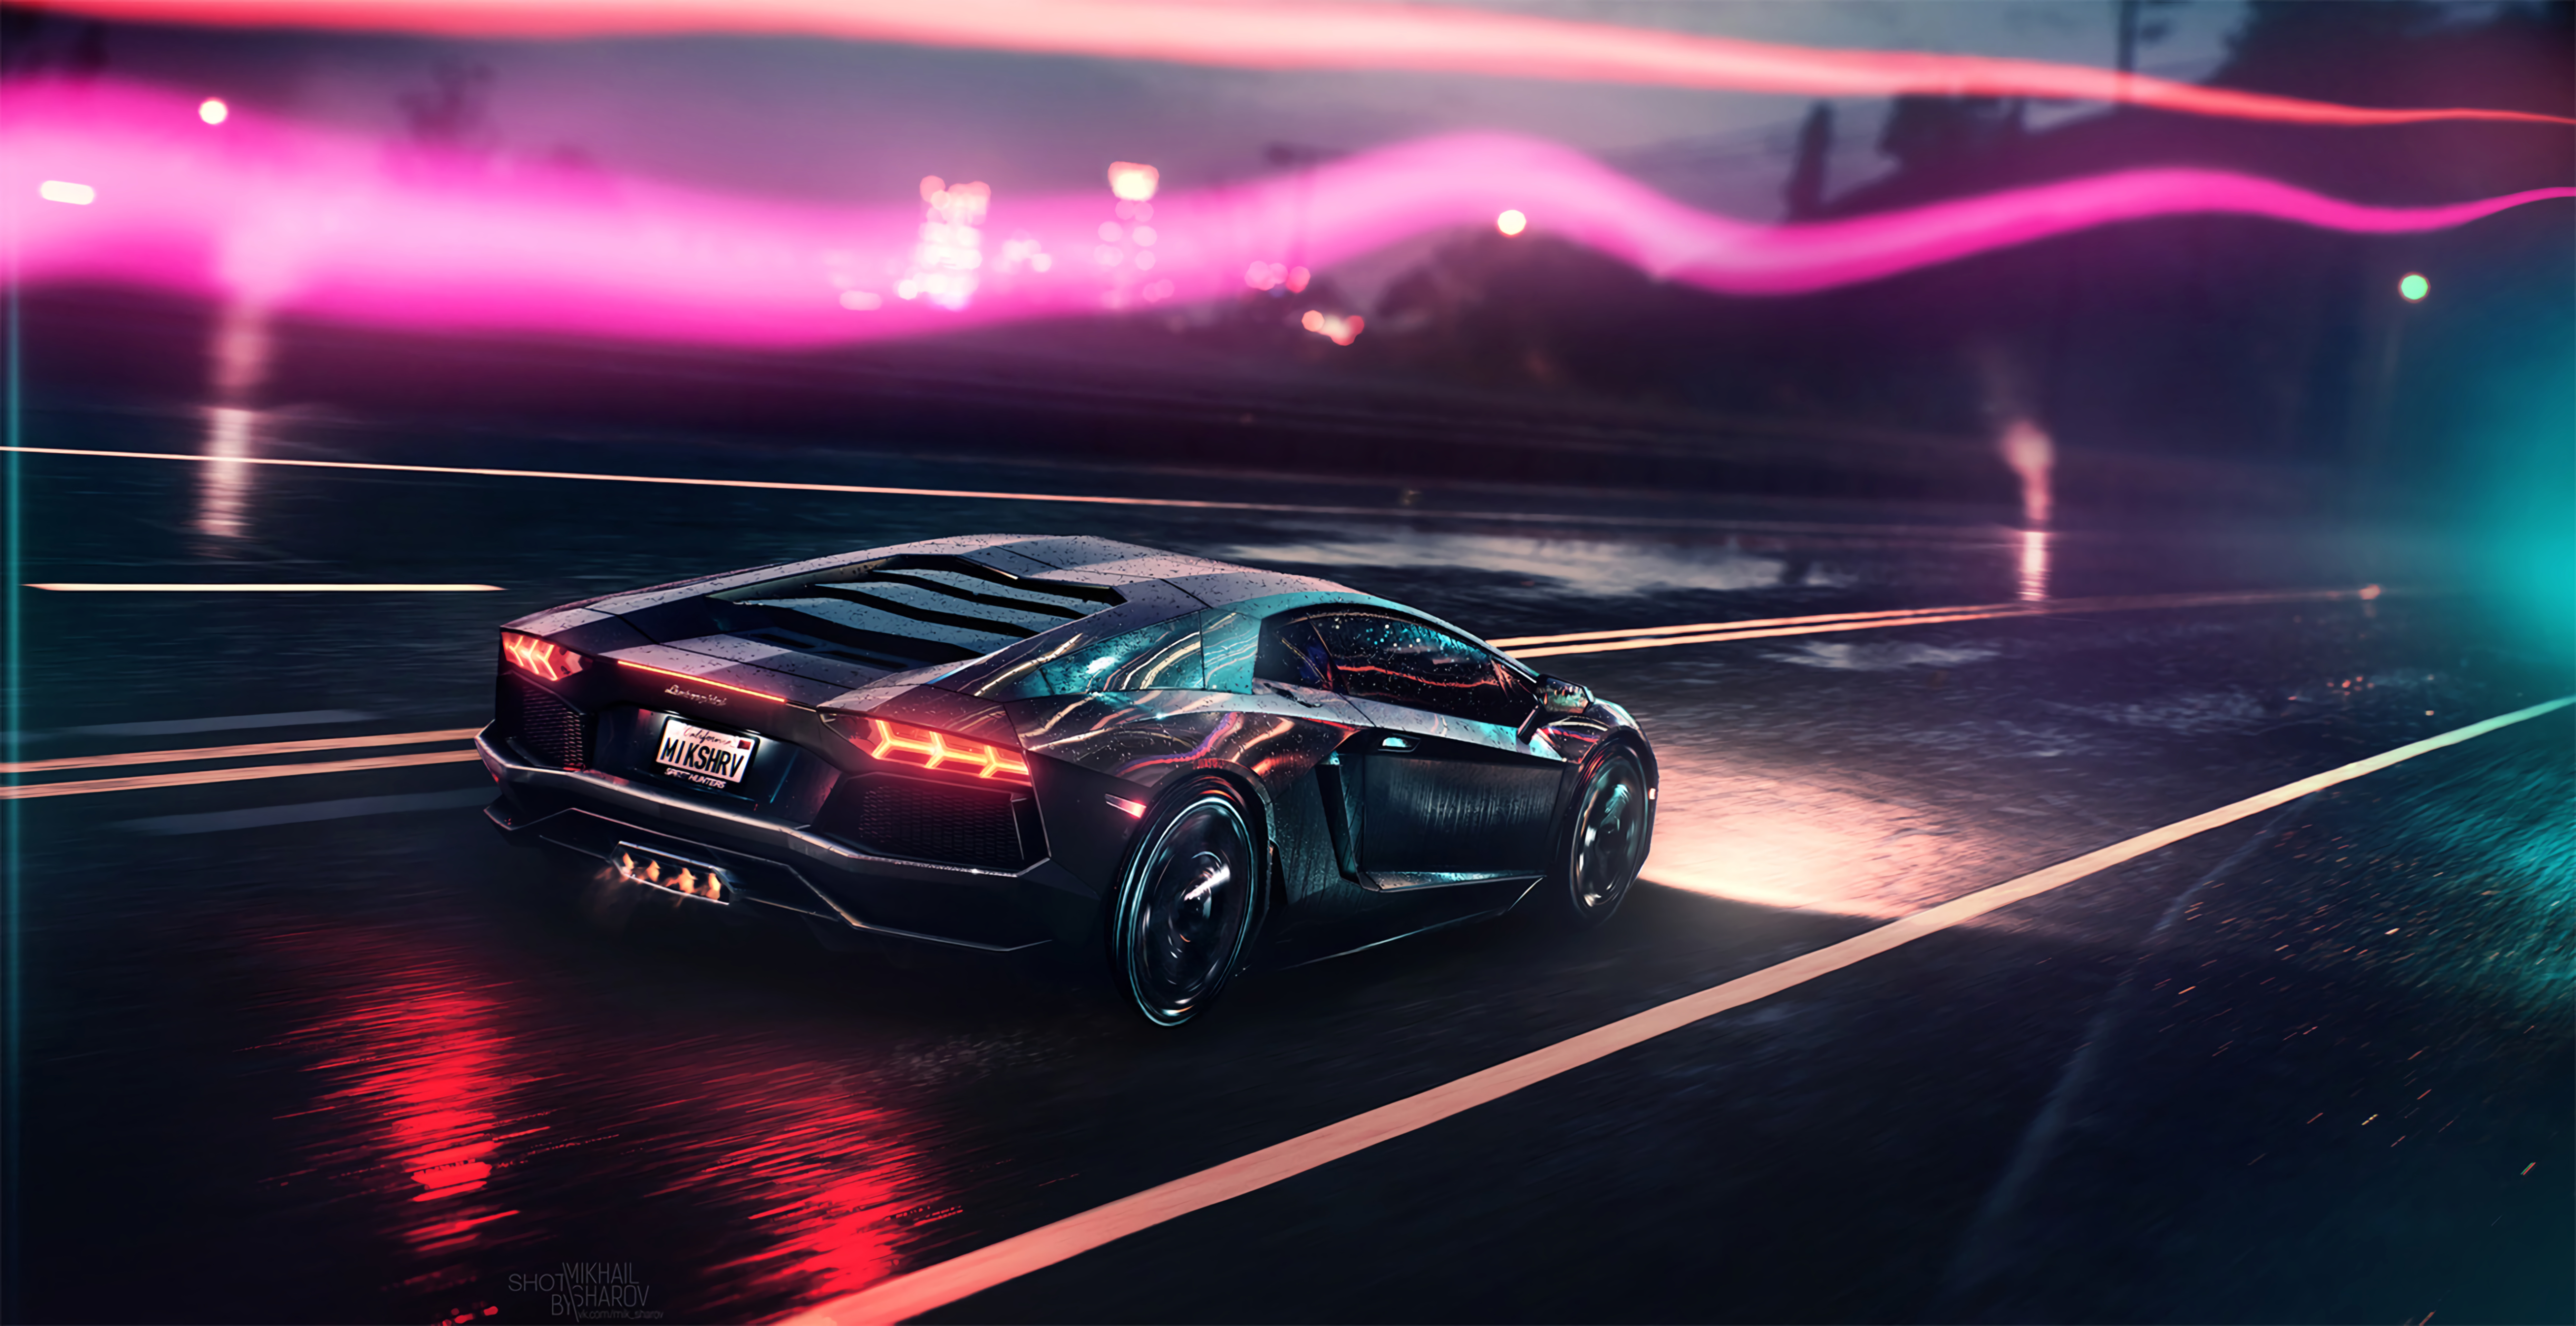 87013 download wallpaper sports, night, lamborghini, cars, lights, grey, sports car, side view, track, route, lamborghini aventador screensavers and pictures for free